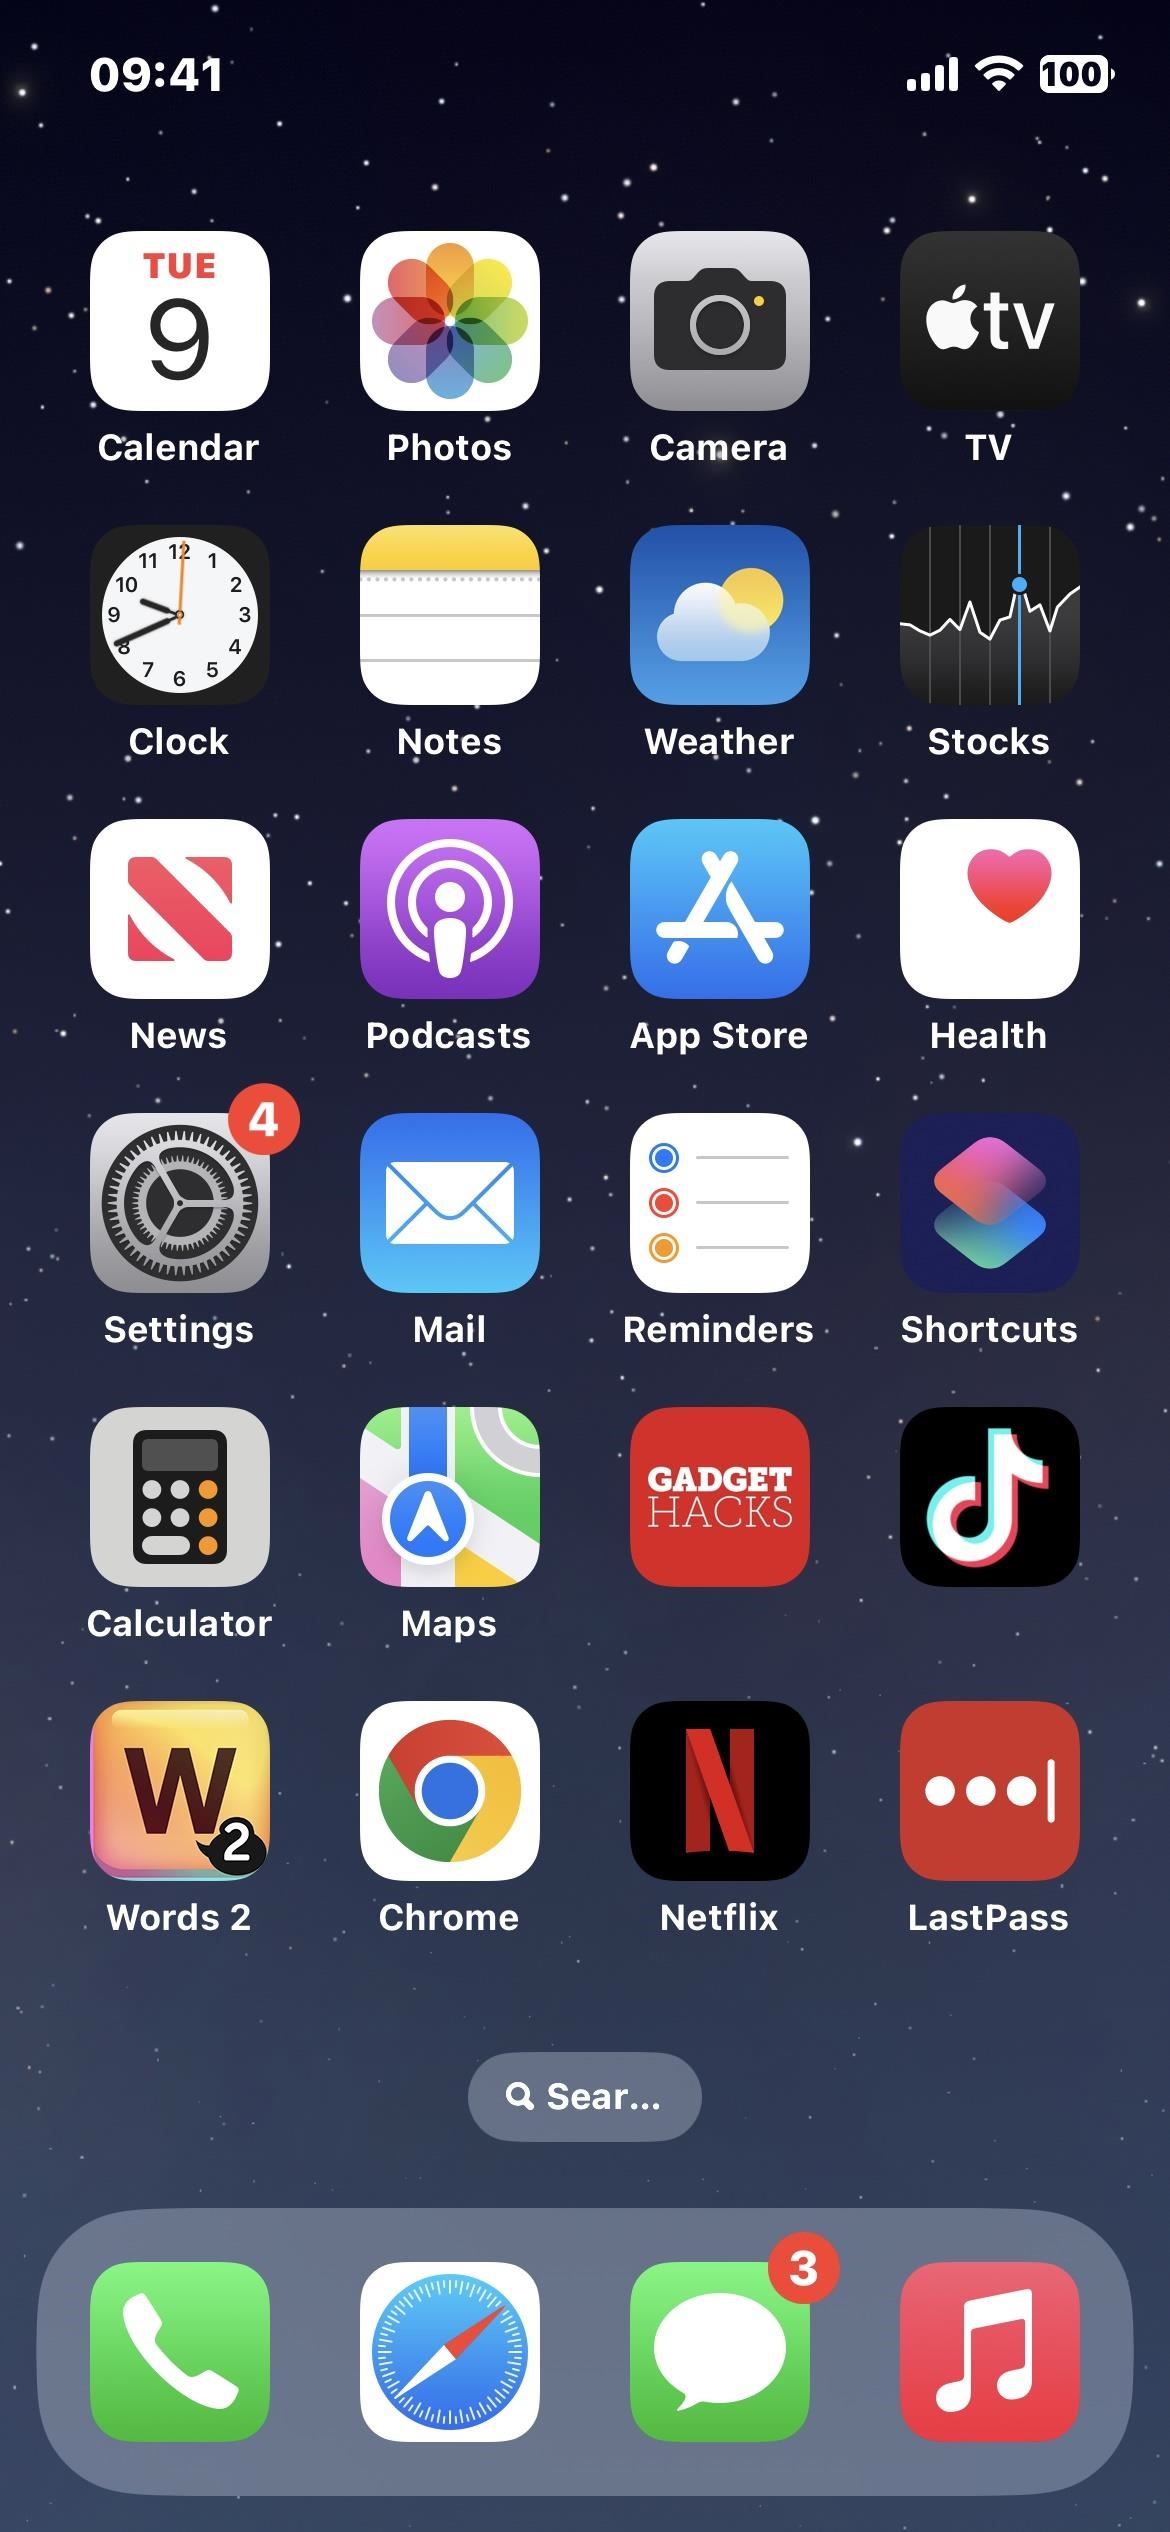 This hidden trick allows you to bold the text in your iPhone's status bar for a more heavy-duty look throughout your system.